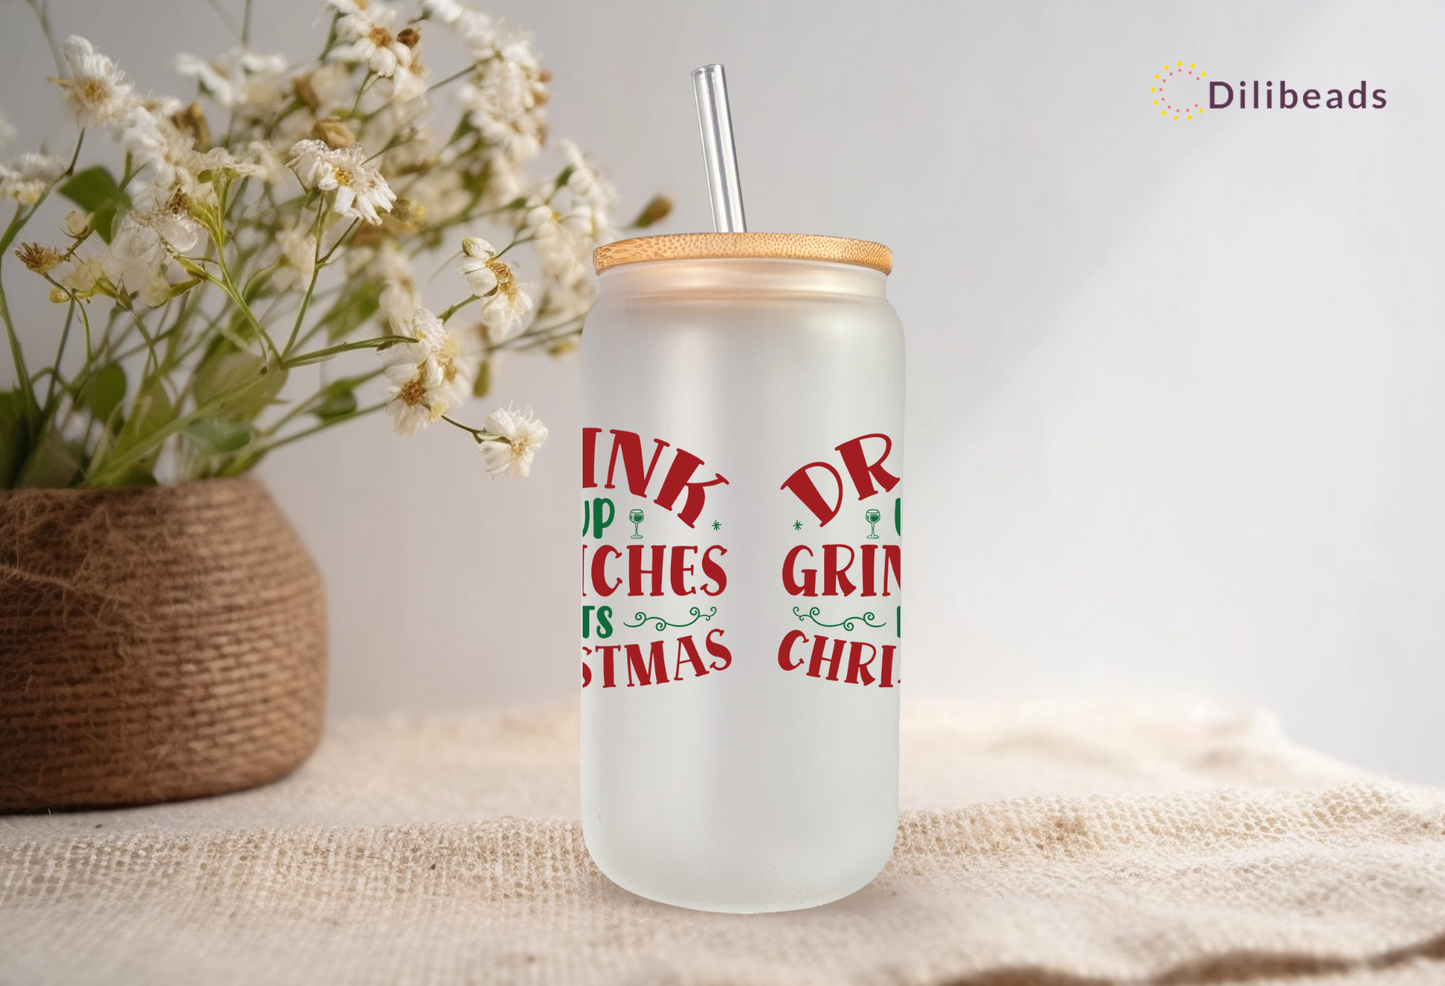 Christmas Glass Tumbler - Drink Up Grinches - Festive Holiday Drinkware - Unique Christmas Gift - Customizable Personalized Glass